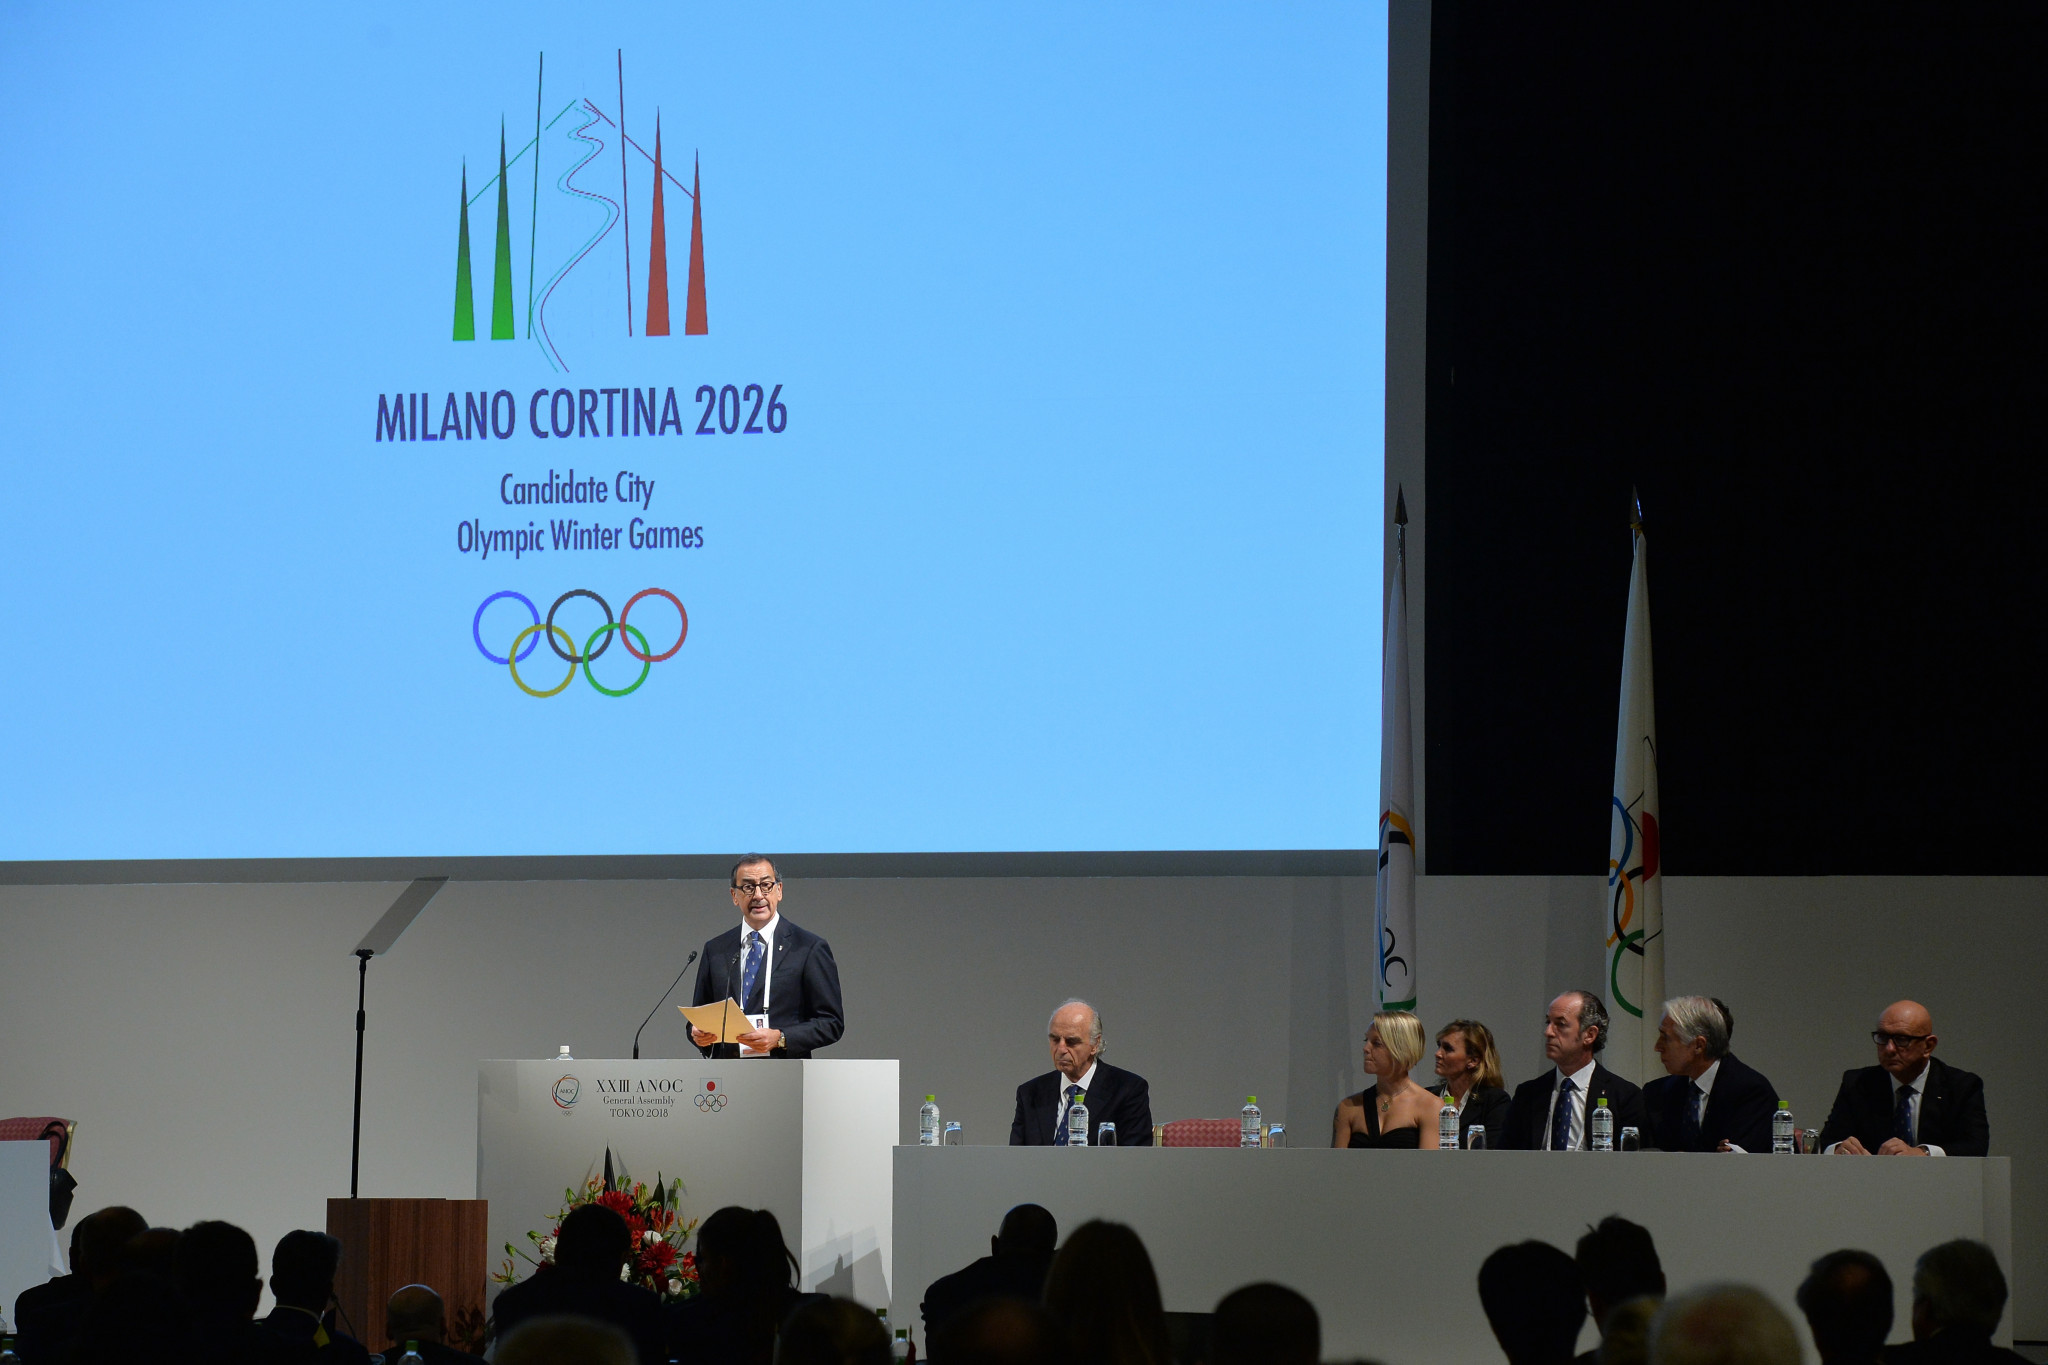 Should Milan-Cortina be awarded the 2026 Winter Olympics and Paralympics, Italy intends to enact an Olympic Law by the end of 2019 ©Getty Images